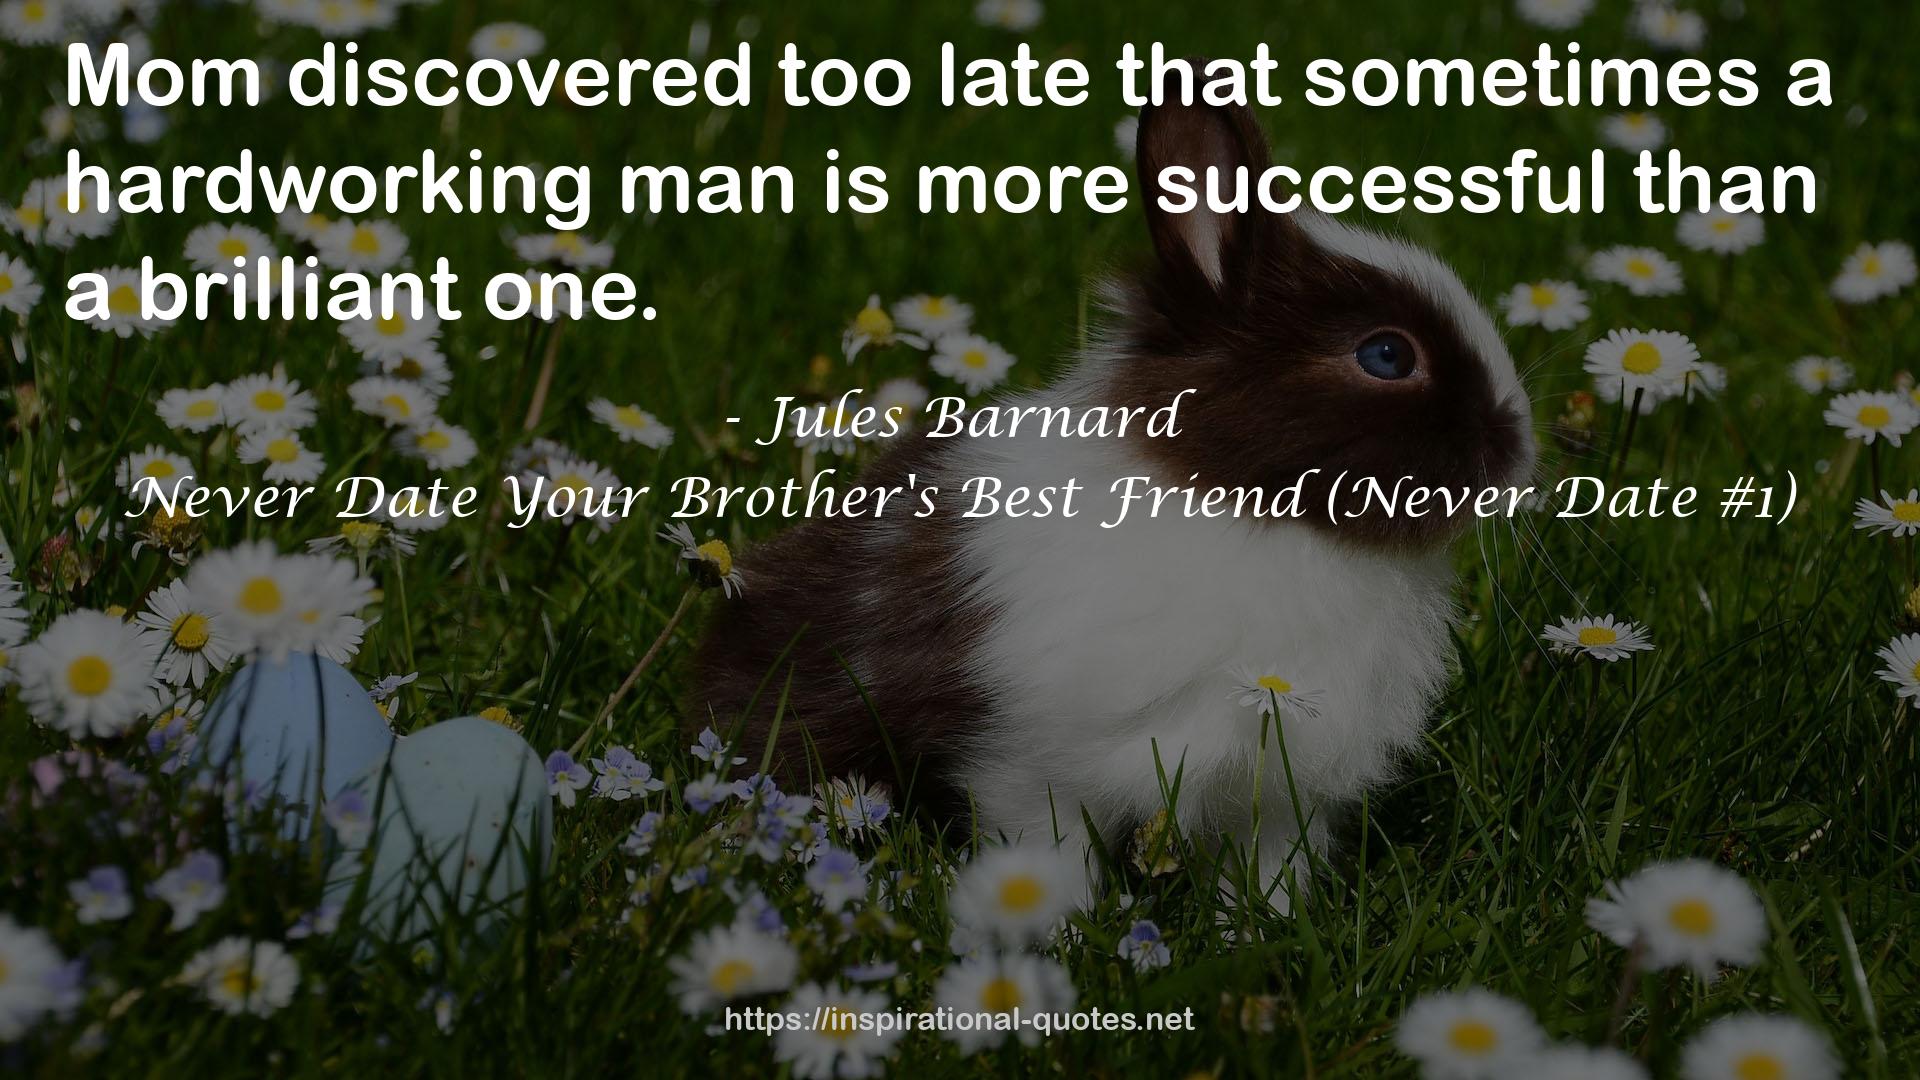 Never Date Your Brother's Best Friend (Never Date #1) QUOTES